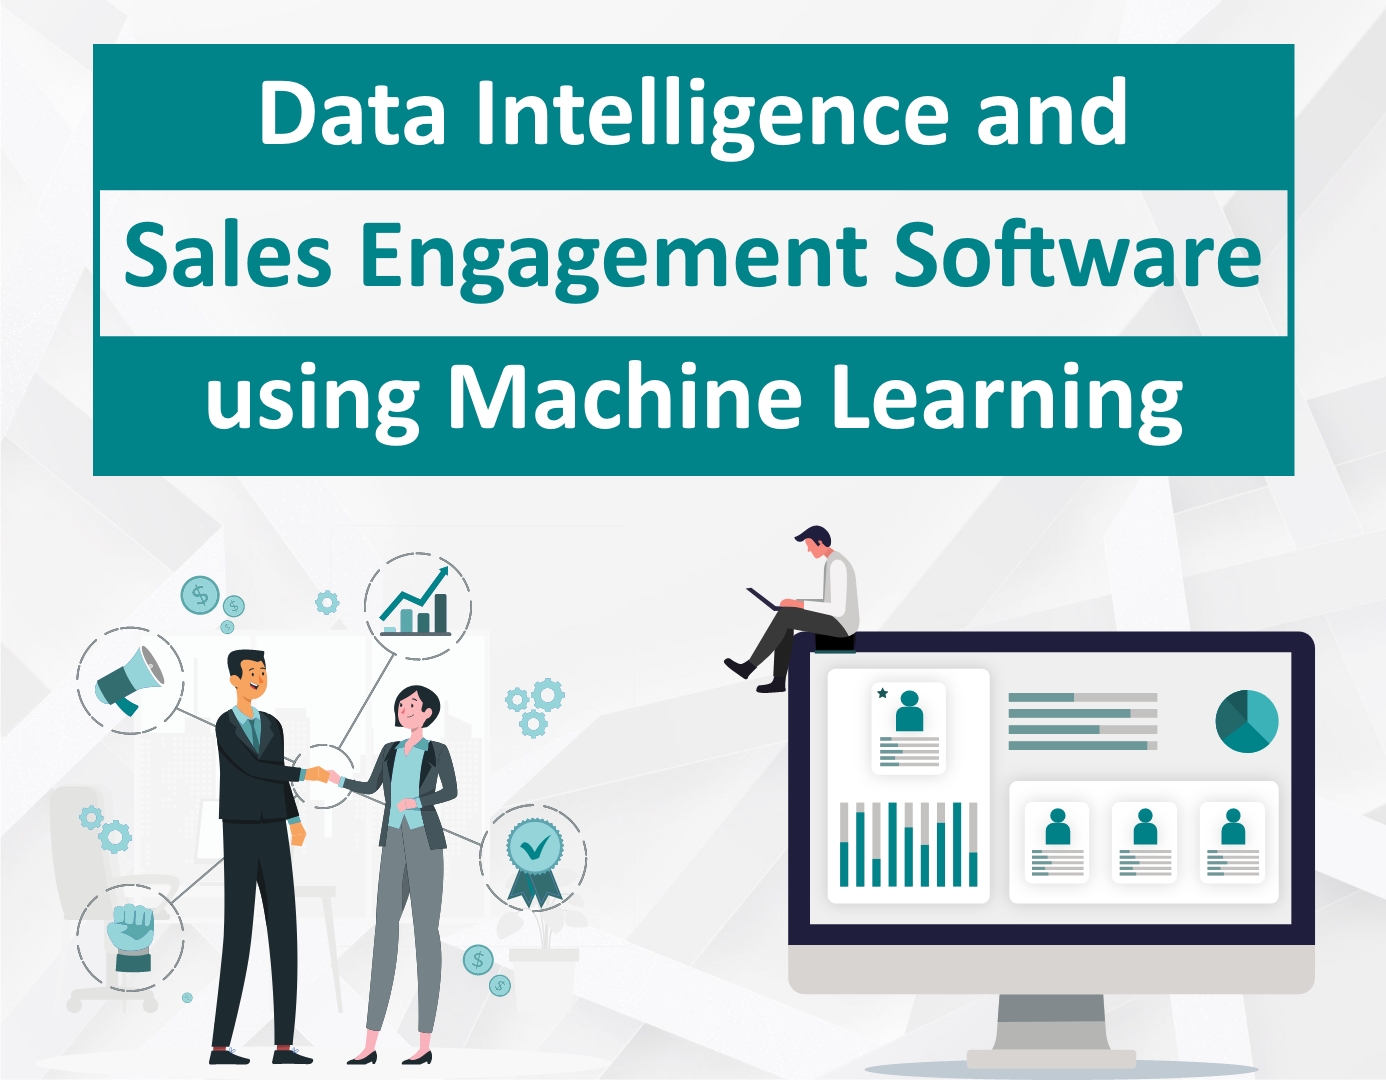 Data intelligence and ML-based sales software, optimizing sales strategies and customer engagement.